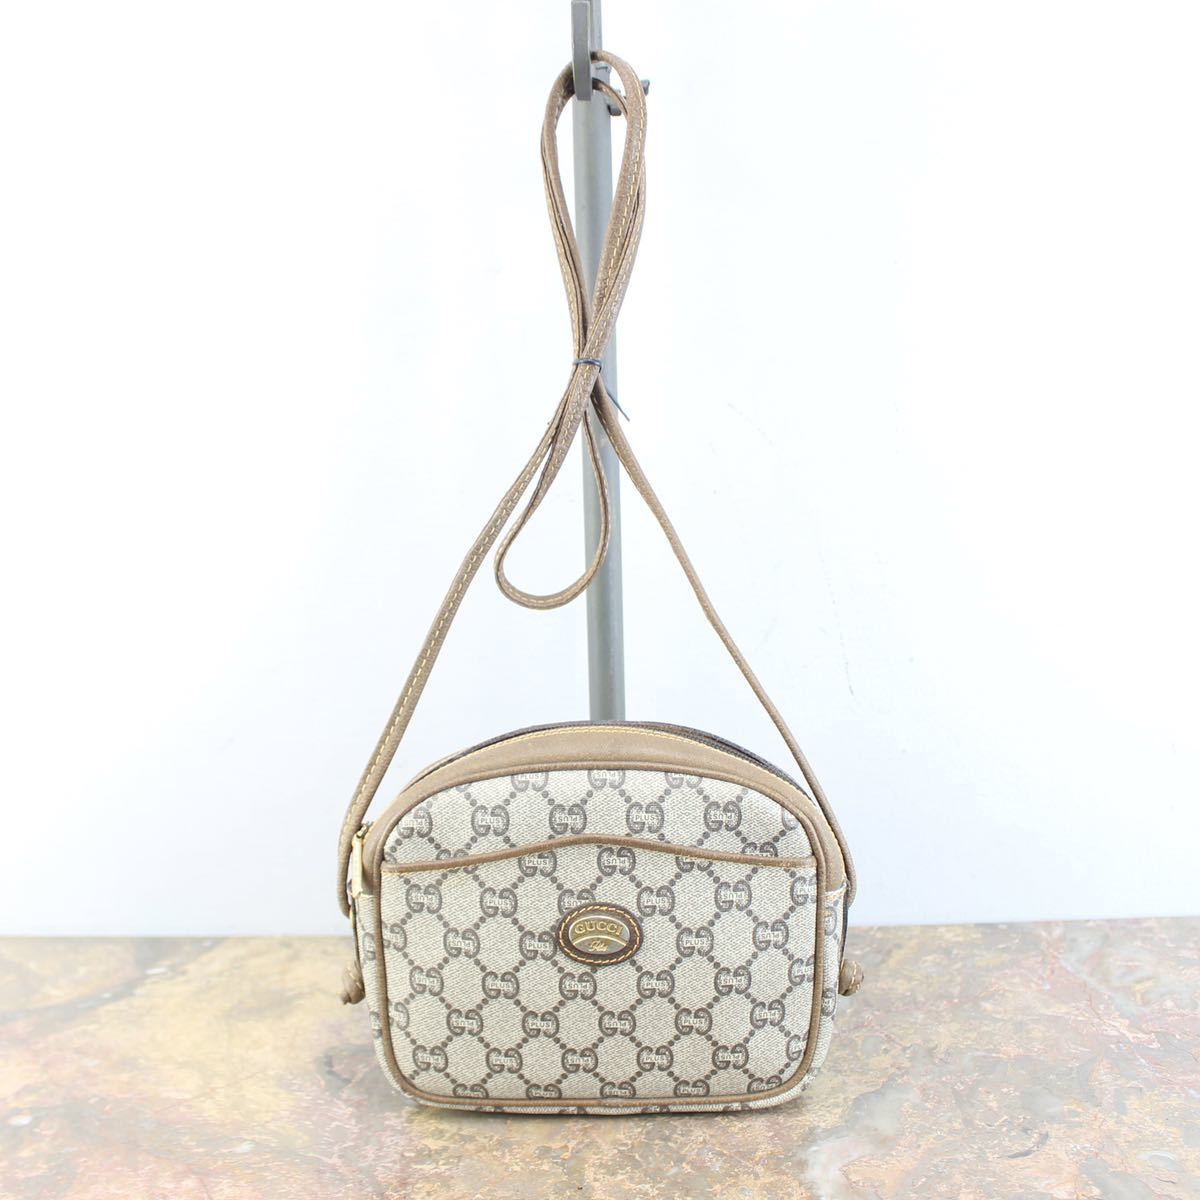 OLD GUCCI PLUS GG PATTERNED MINI SHOULDER BAG MADE IN ITALY